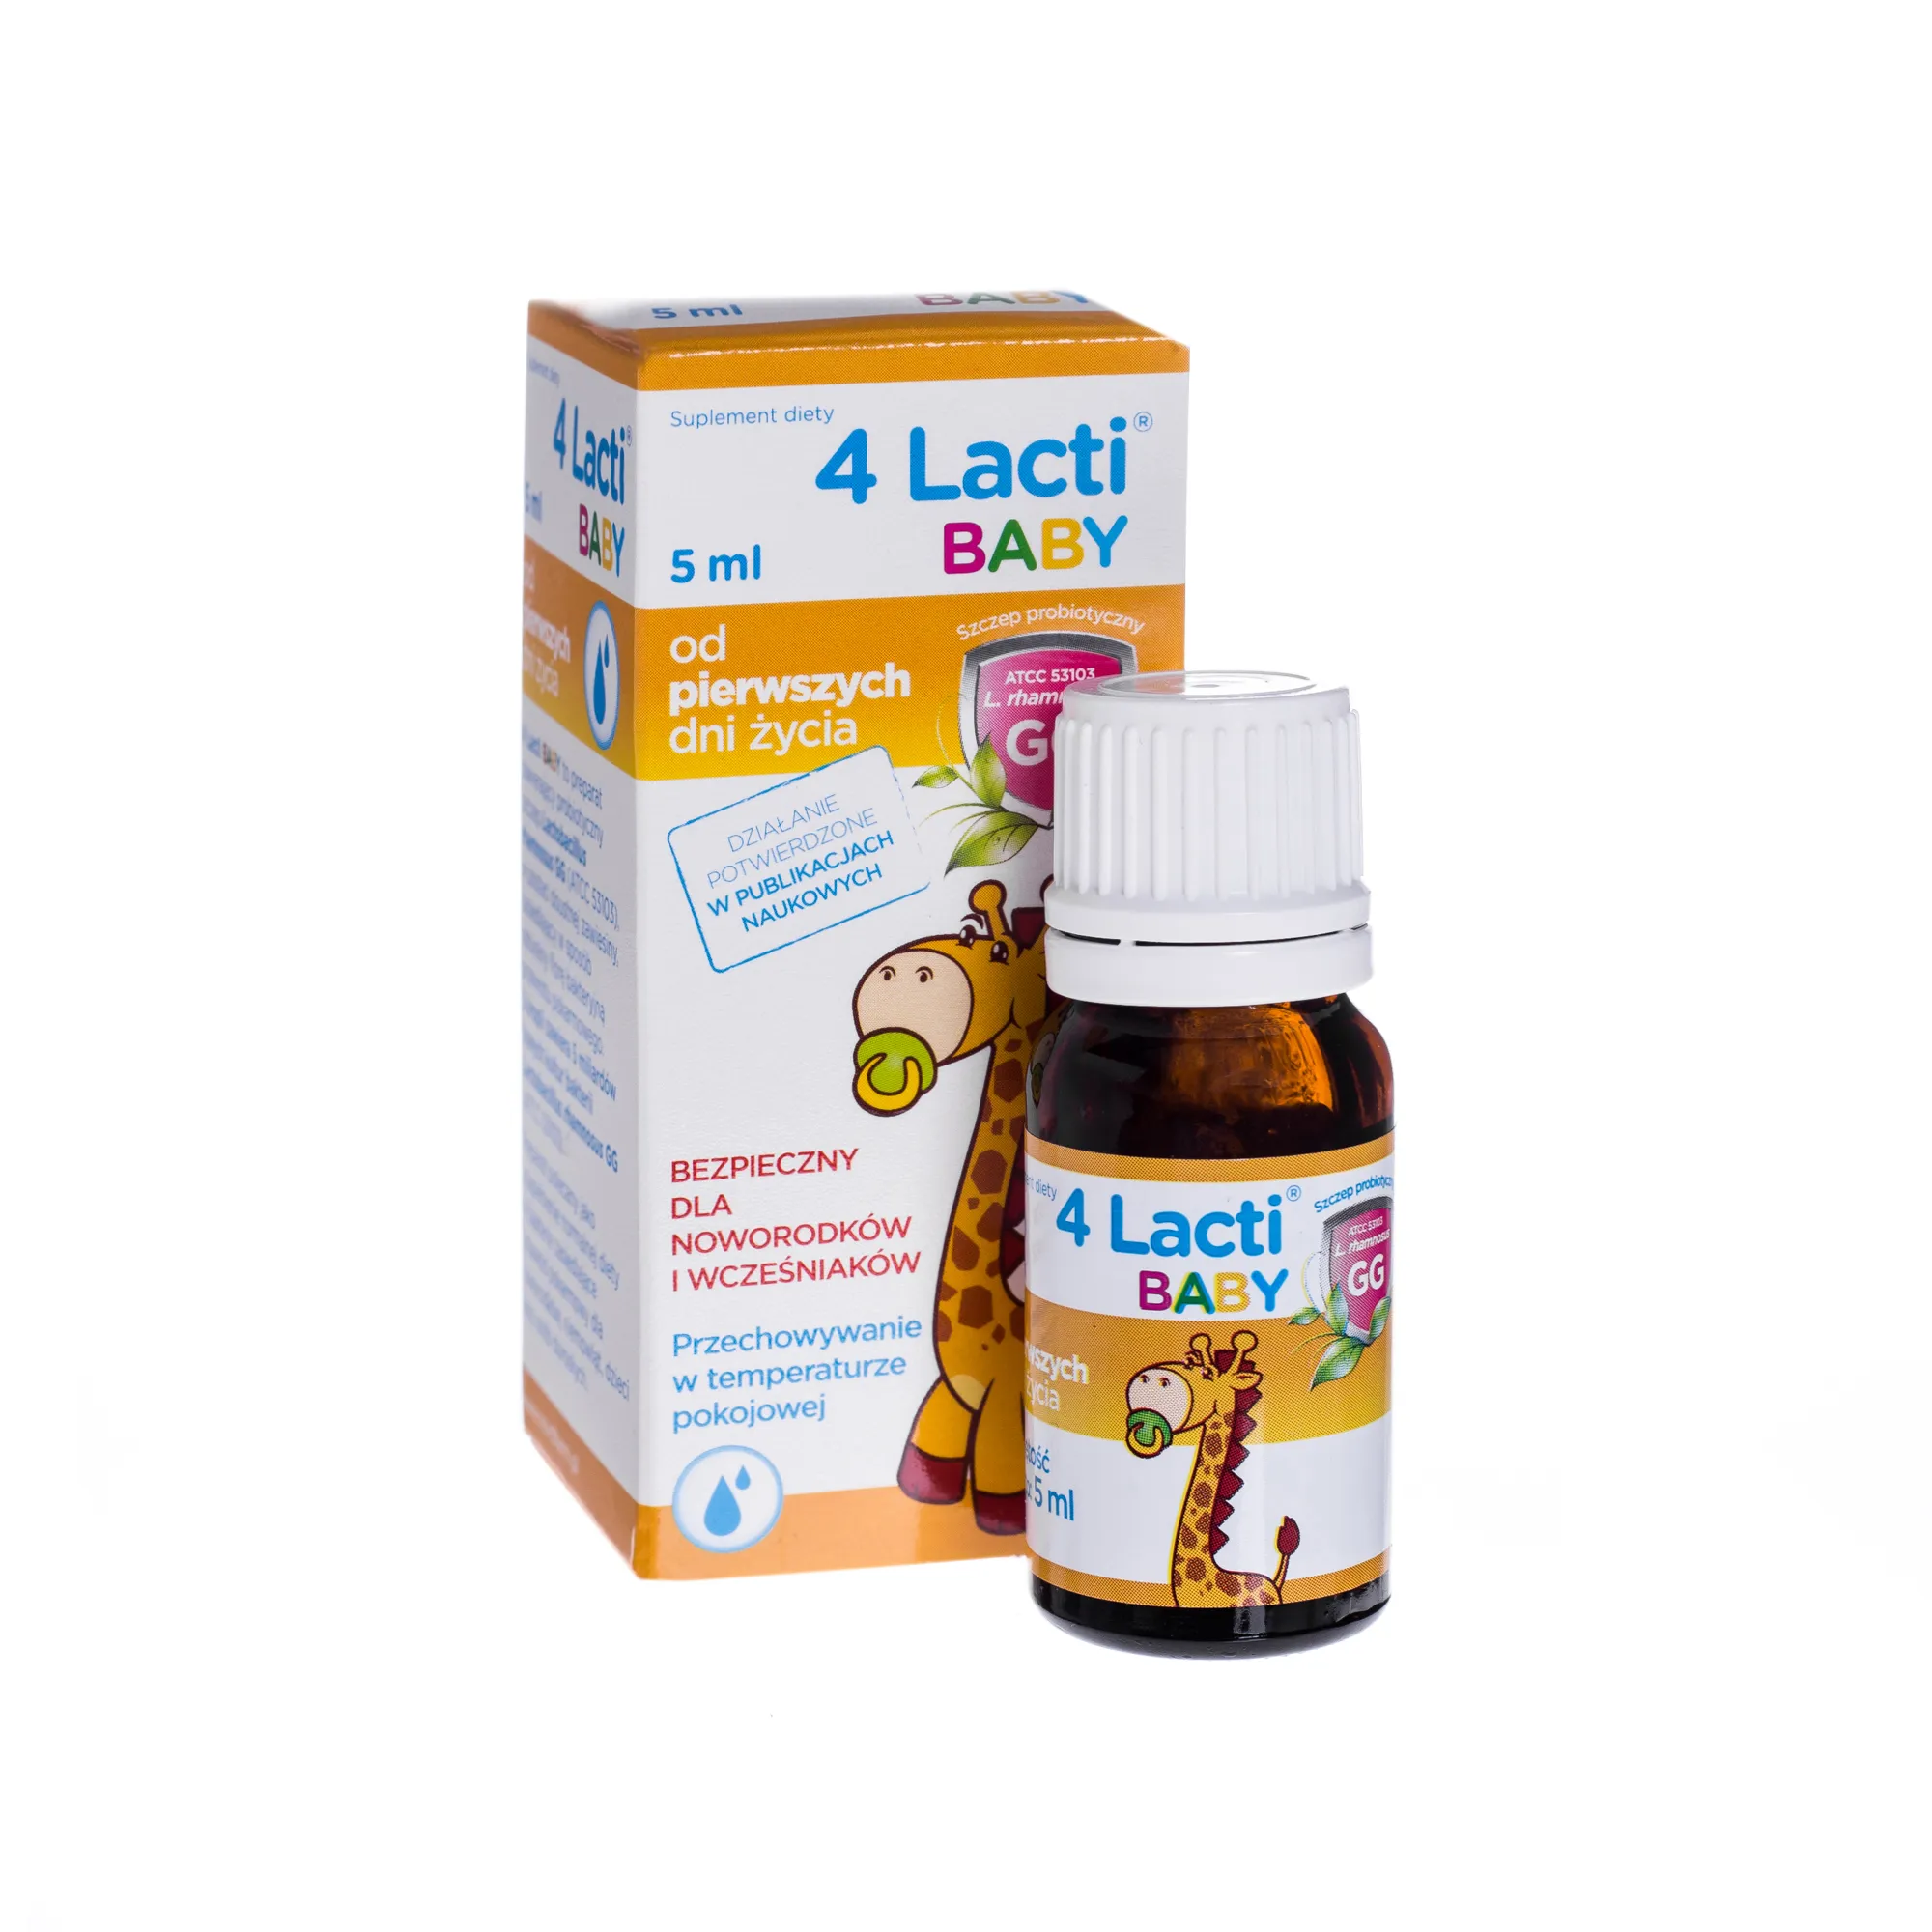 4 Lacti Baby, suplement diety, krople, 5 ml